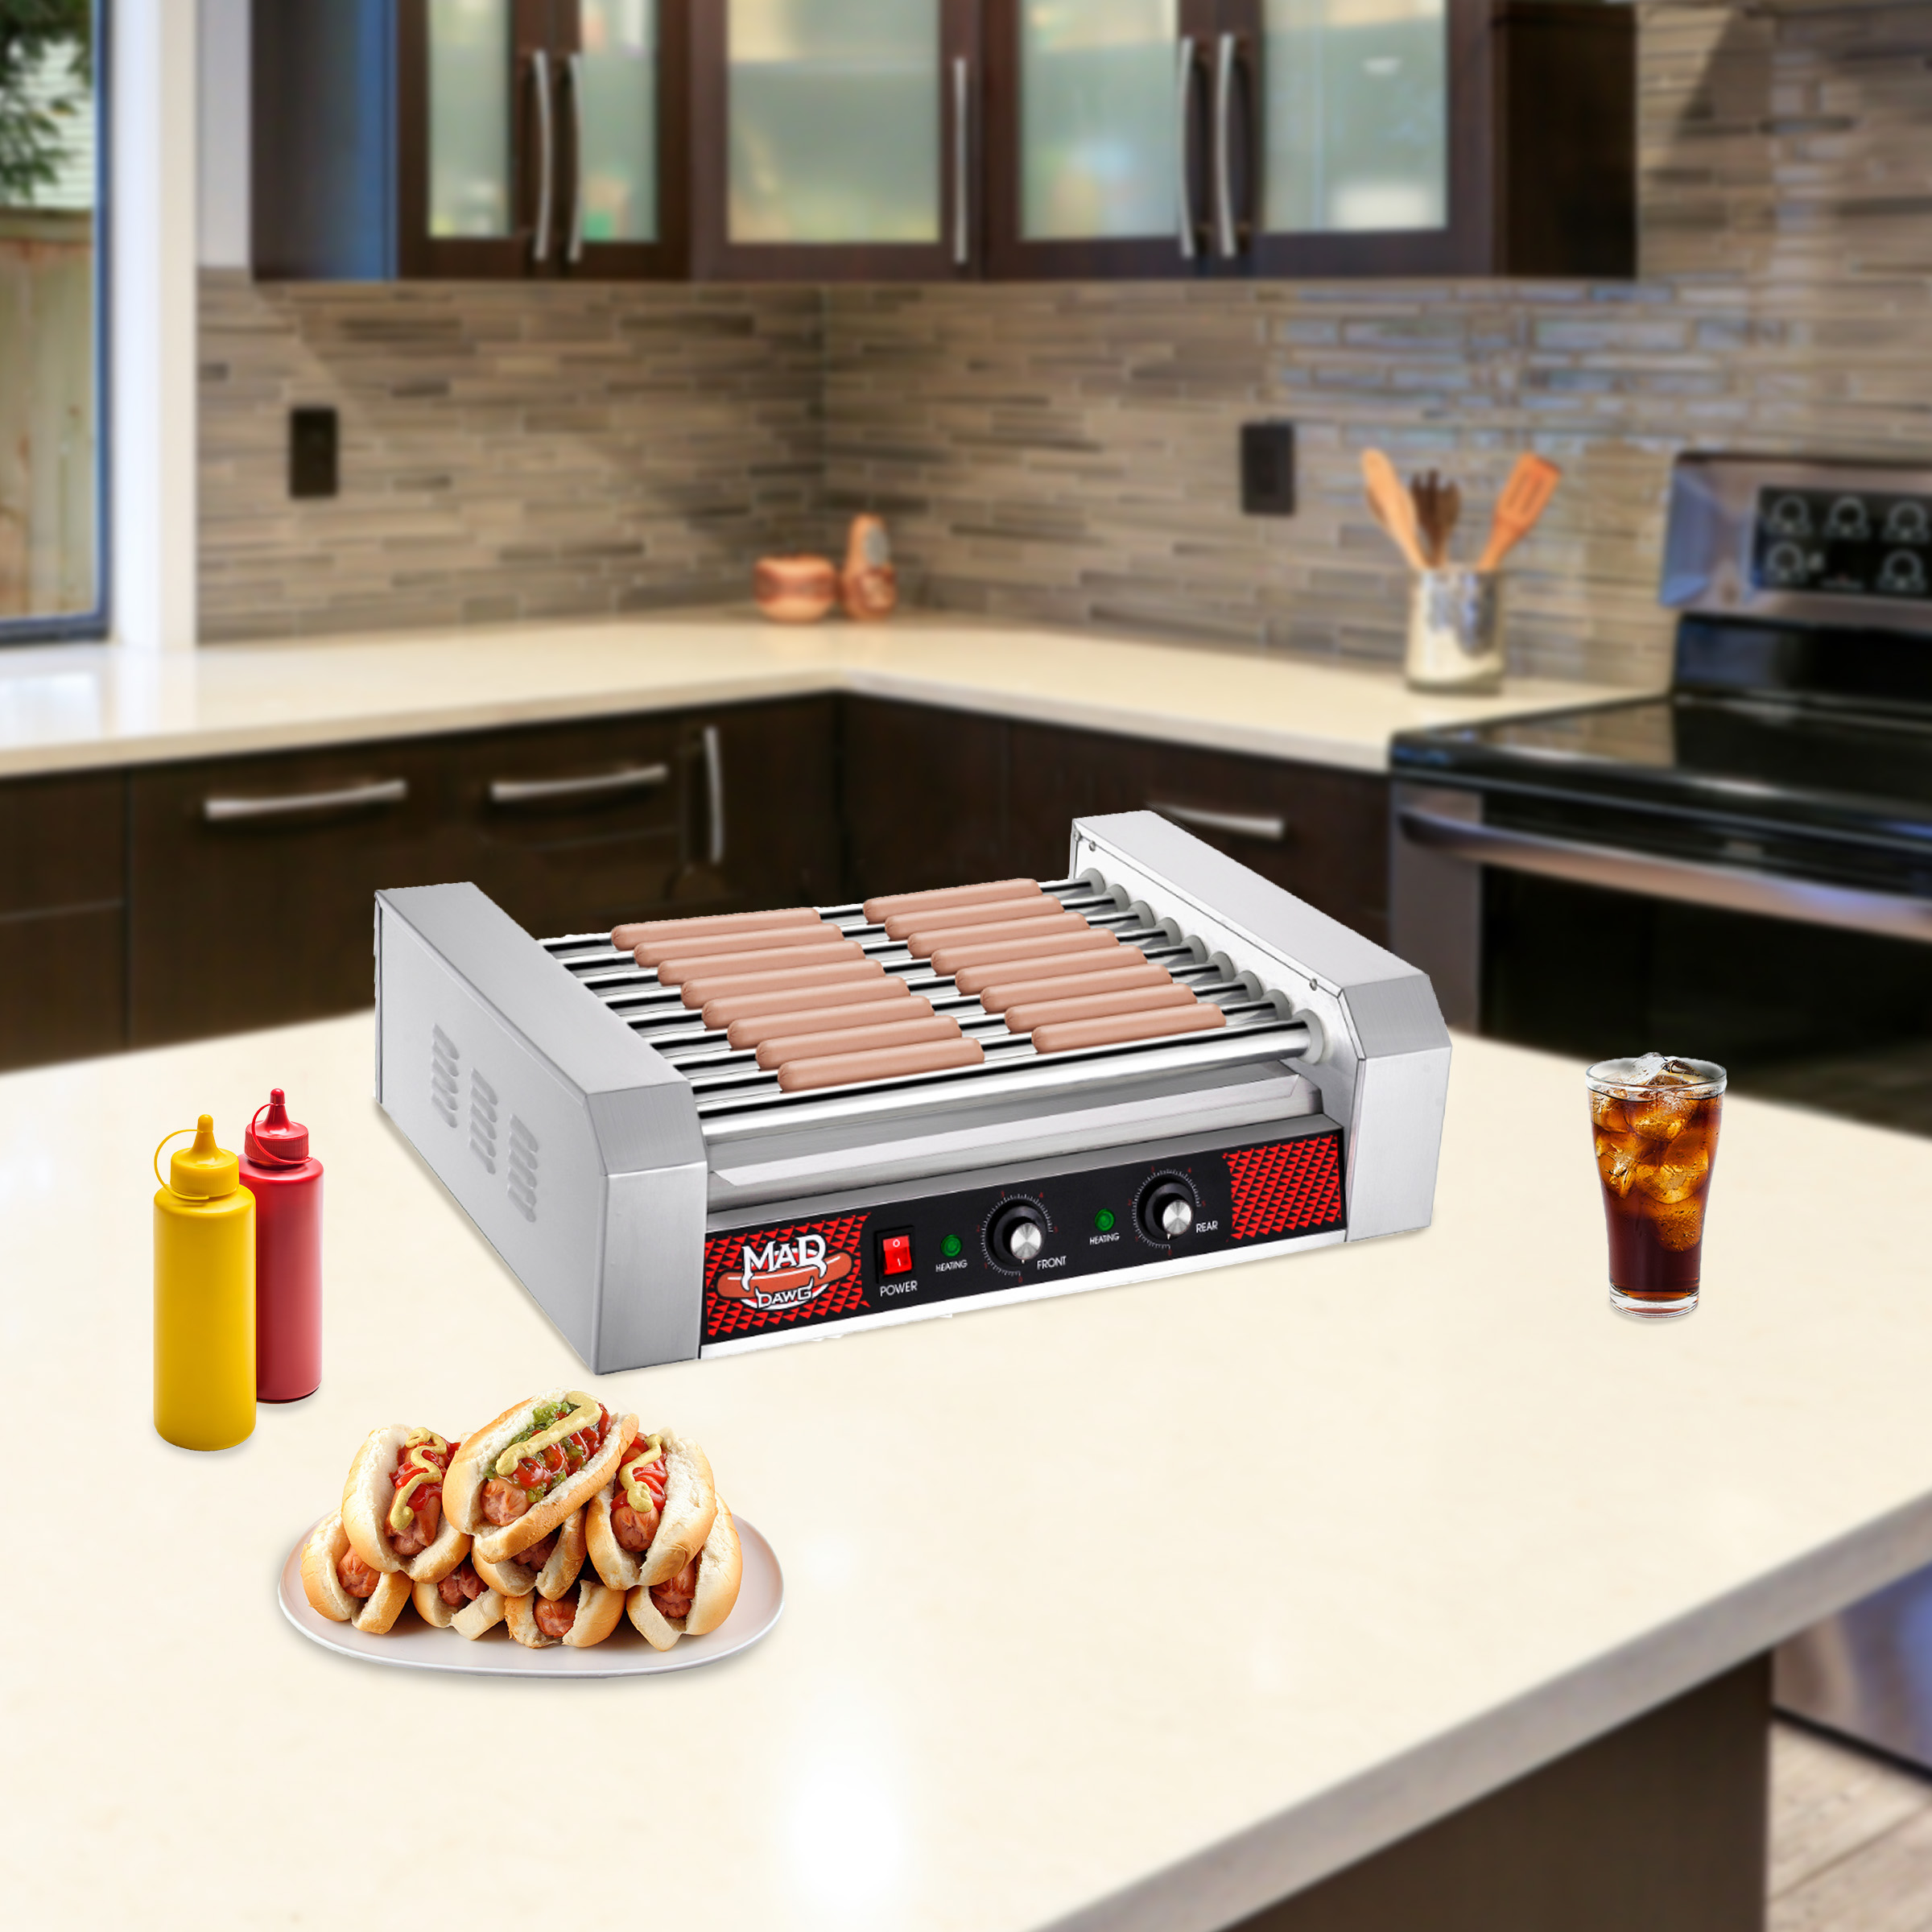 24 Hot Dog Roller Machine- 9 Rollers, Hotdog or Sausage Grill -Electric Countertop Cooker, Drip Tray & Dual Zones by Great Northern Popcorn - image 4 of 5